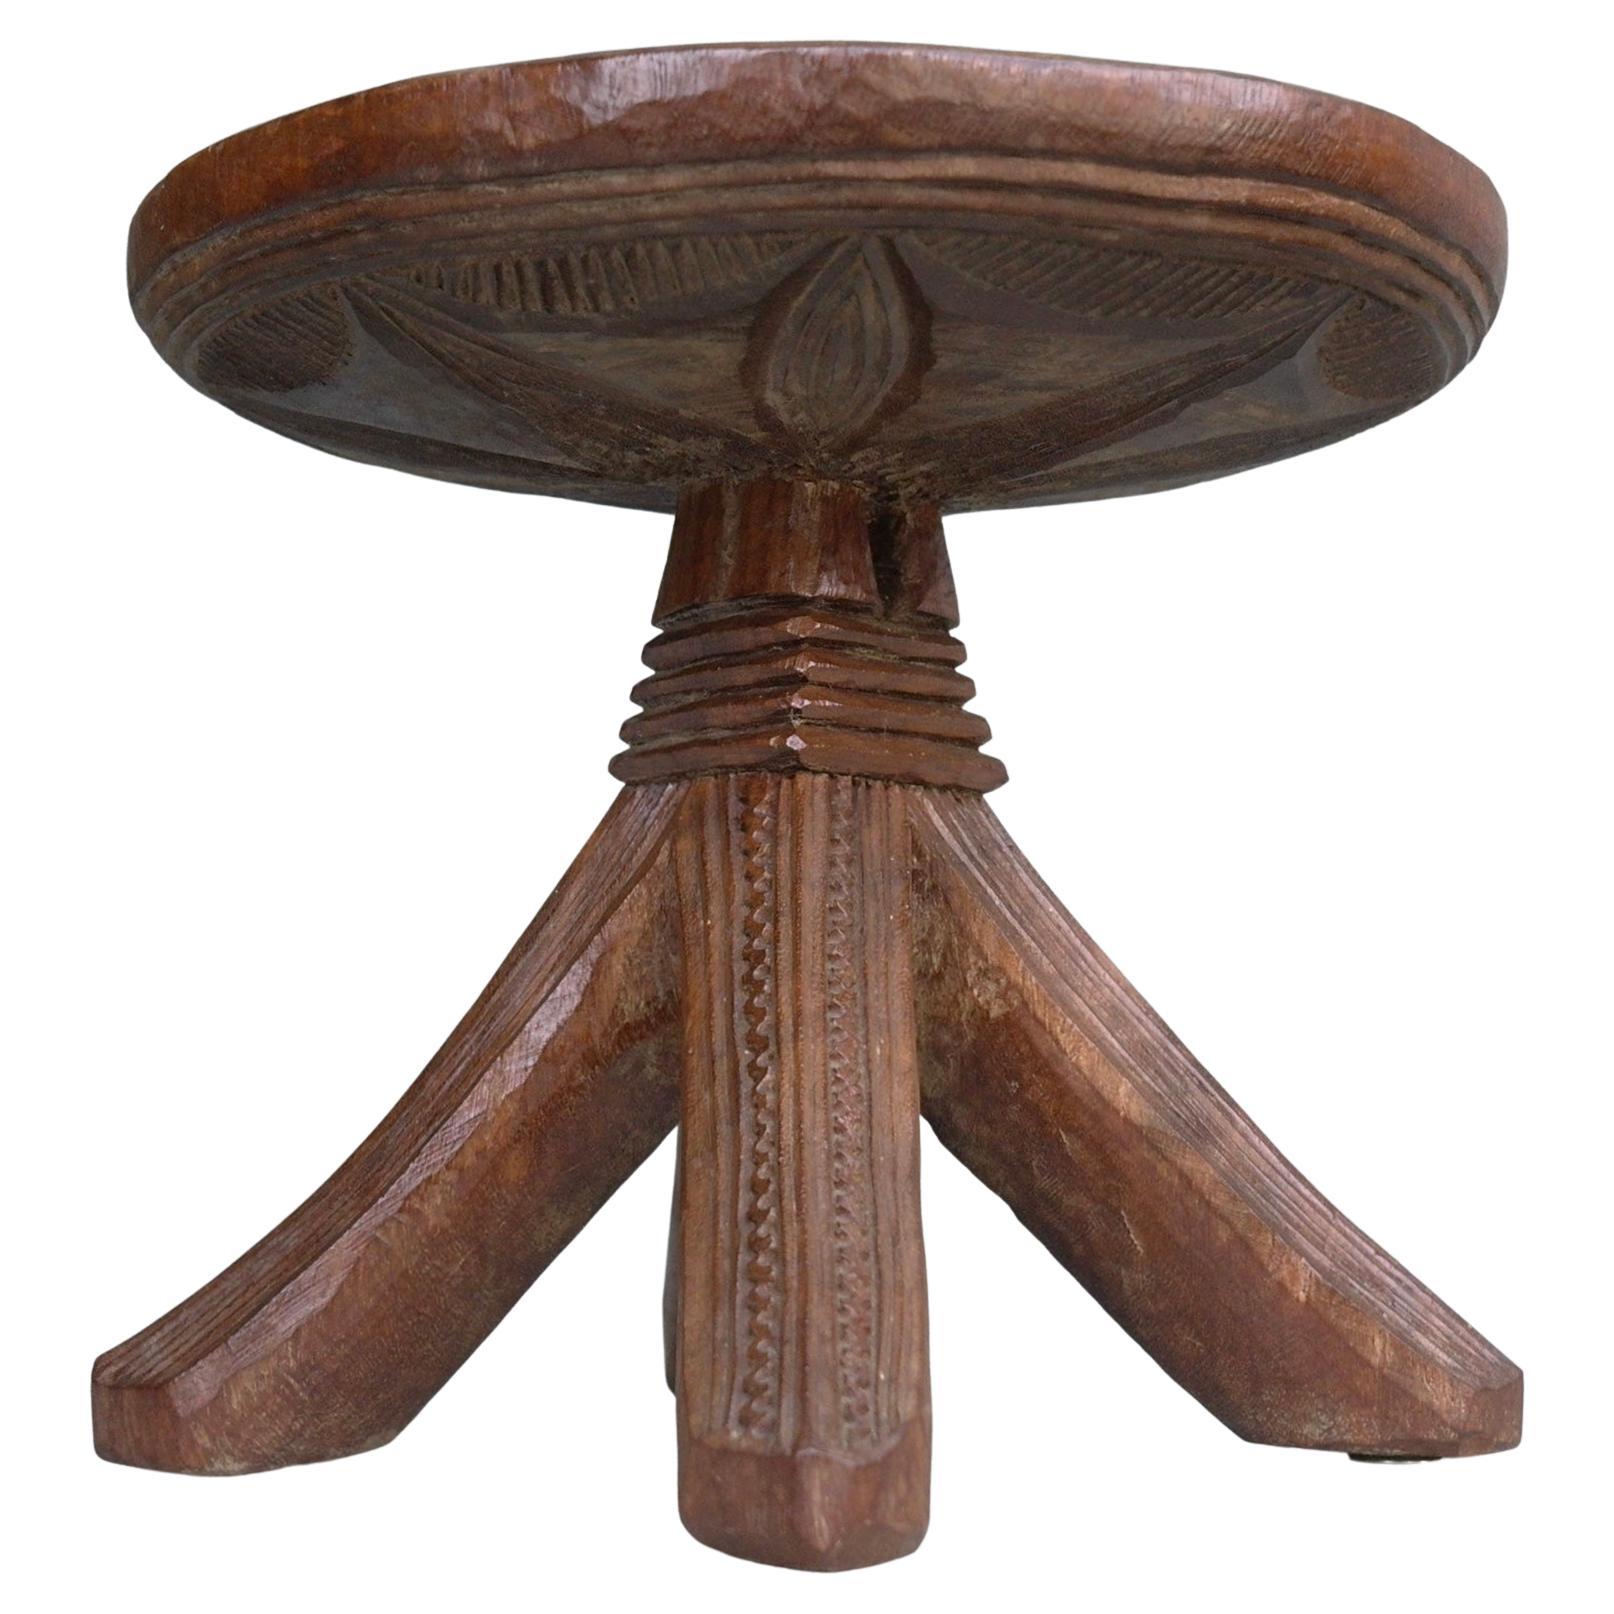 Handcrafted African Tribal Art Craftsmanship Stool, Mid-Century Modern, 1950's For Sale